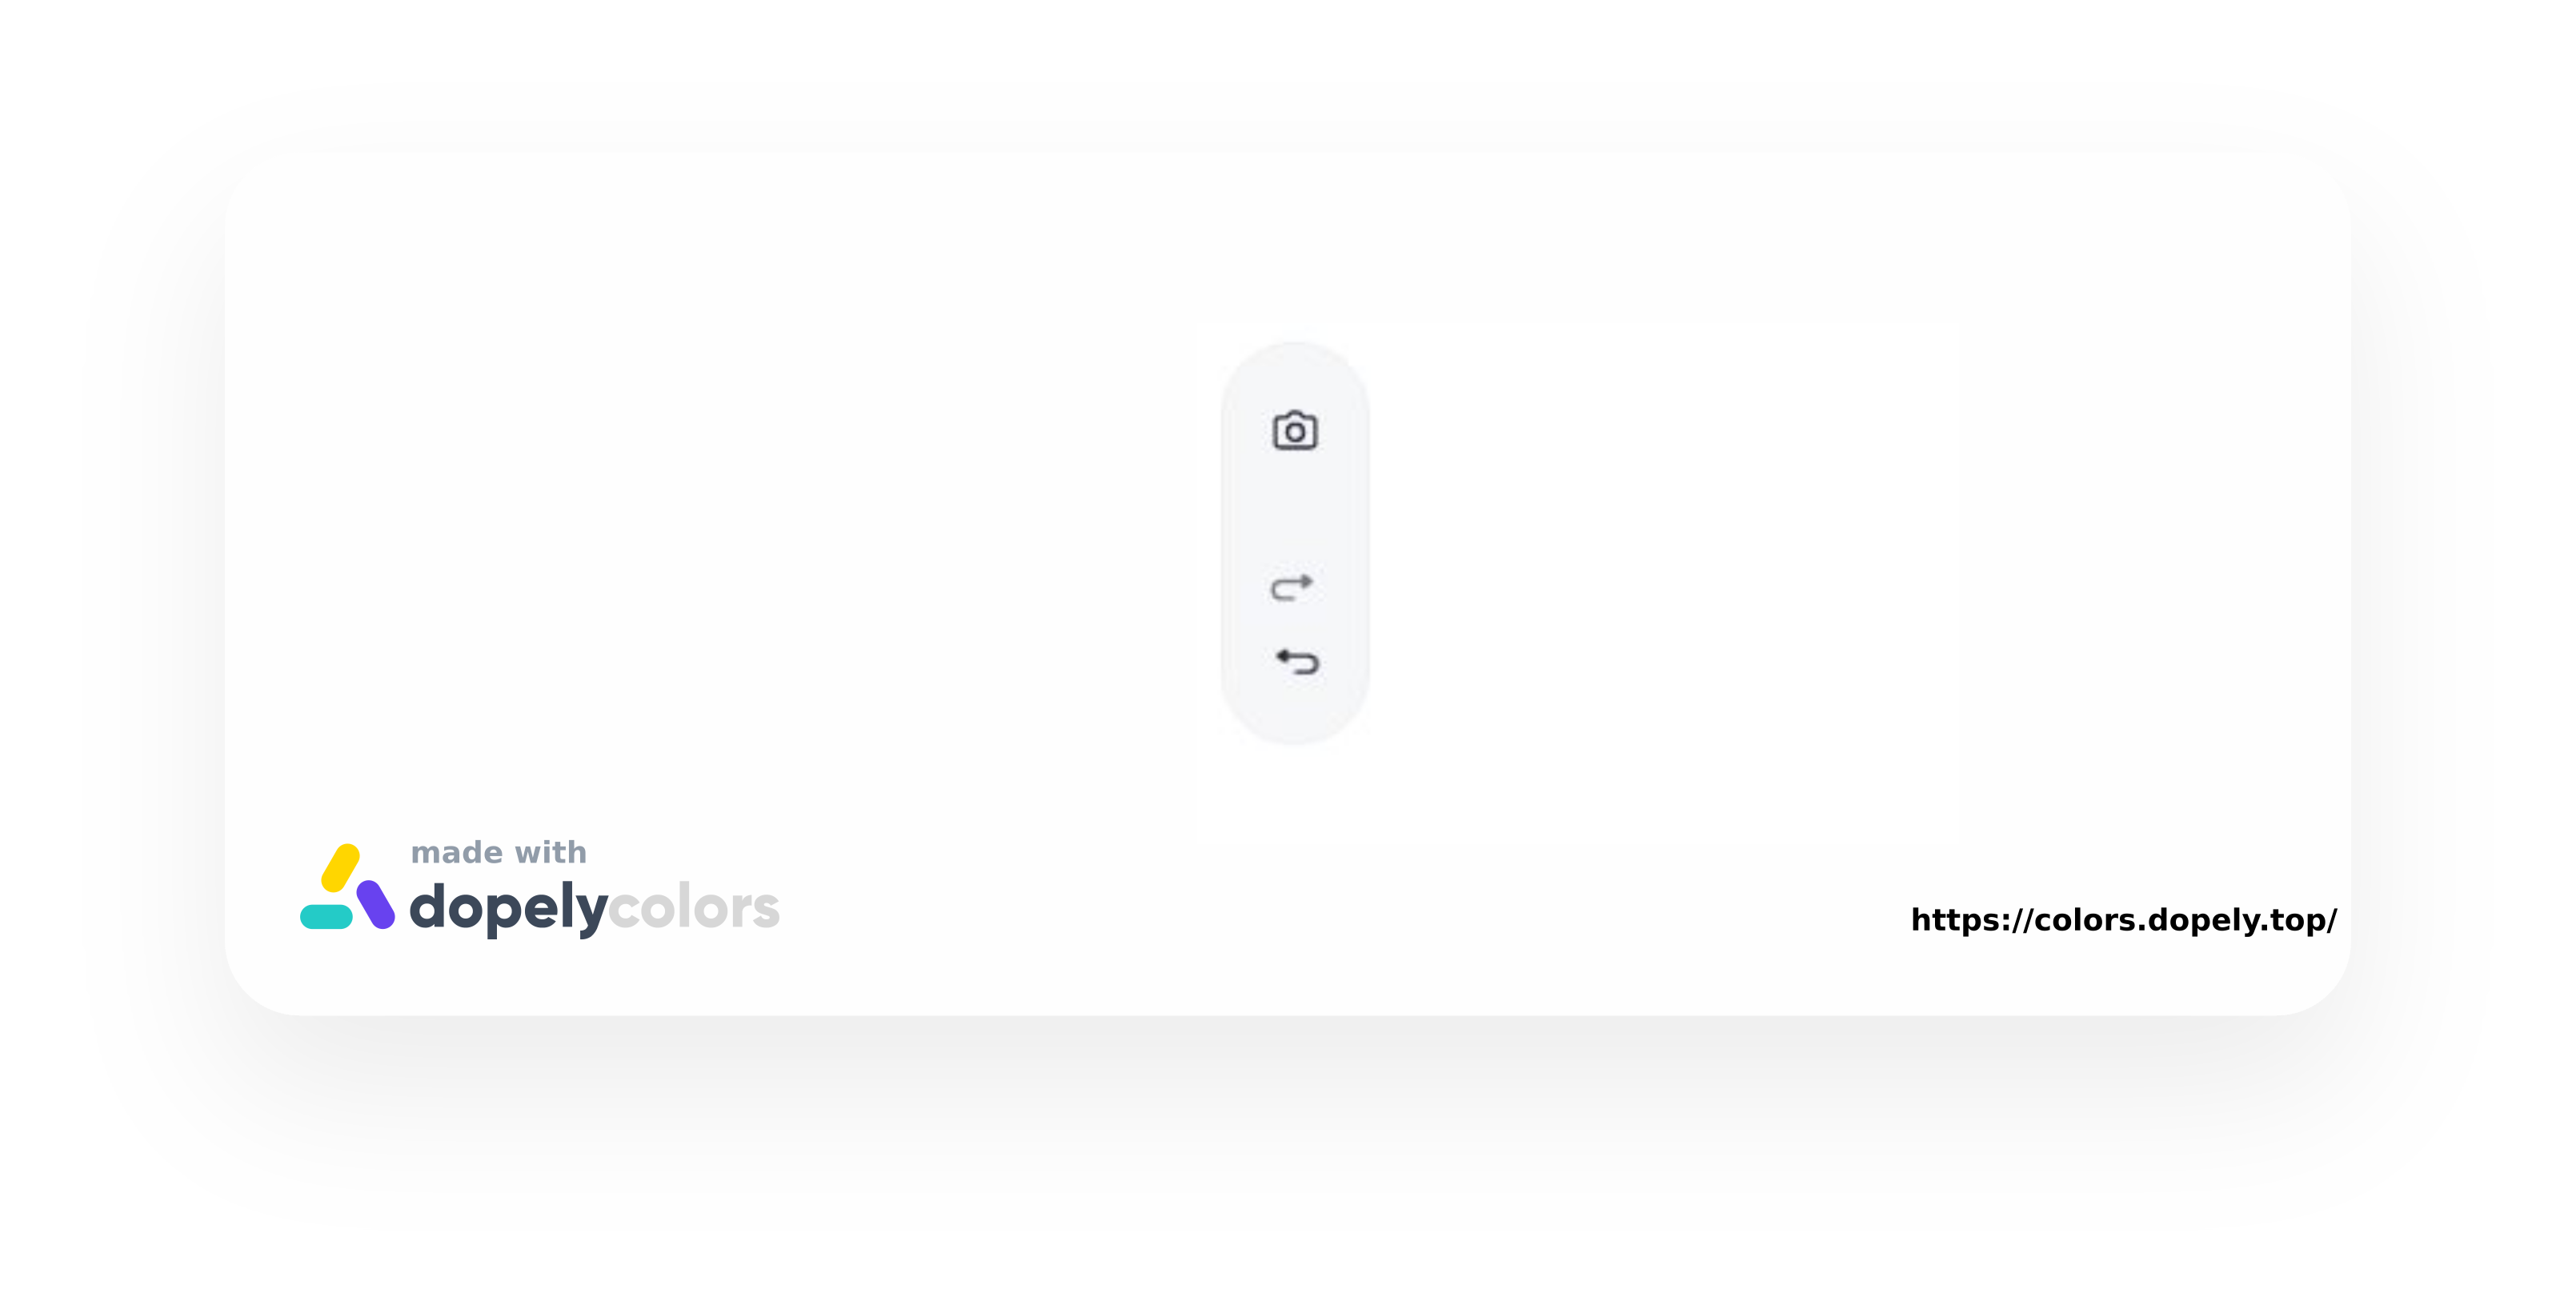 Image color picker icon to get the desired color mixing